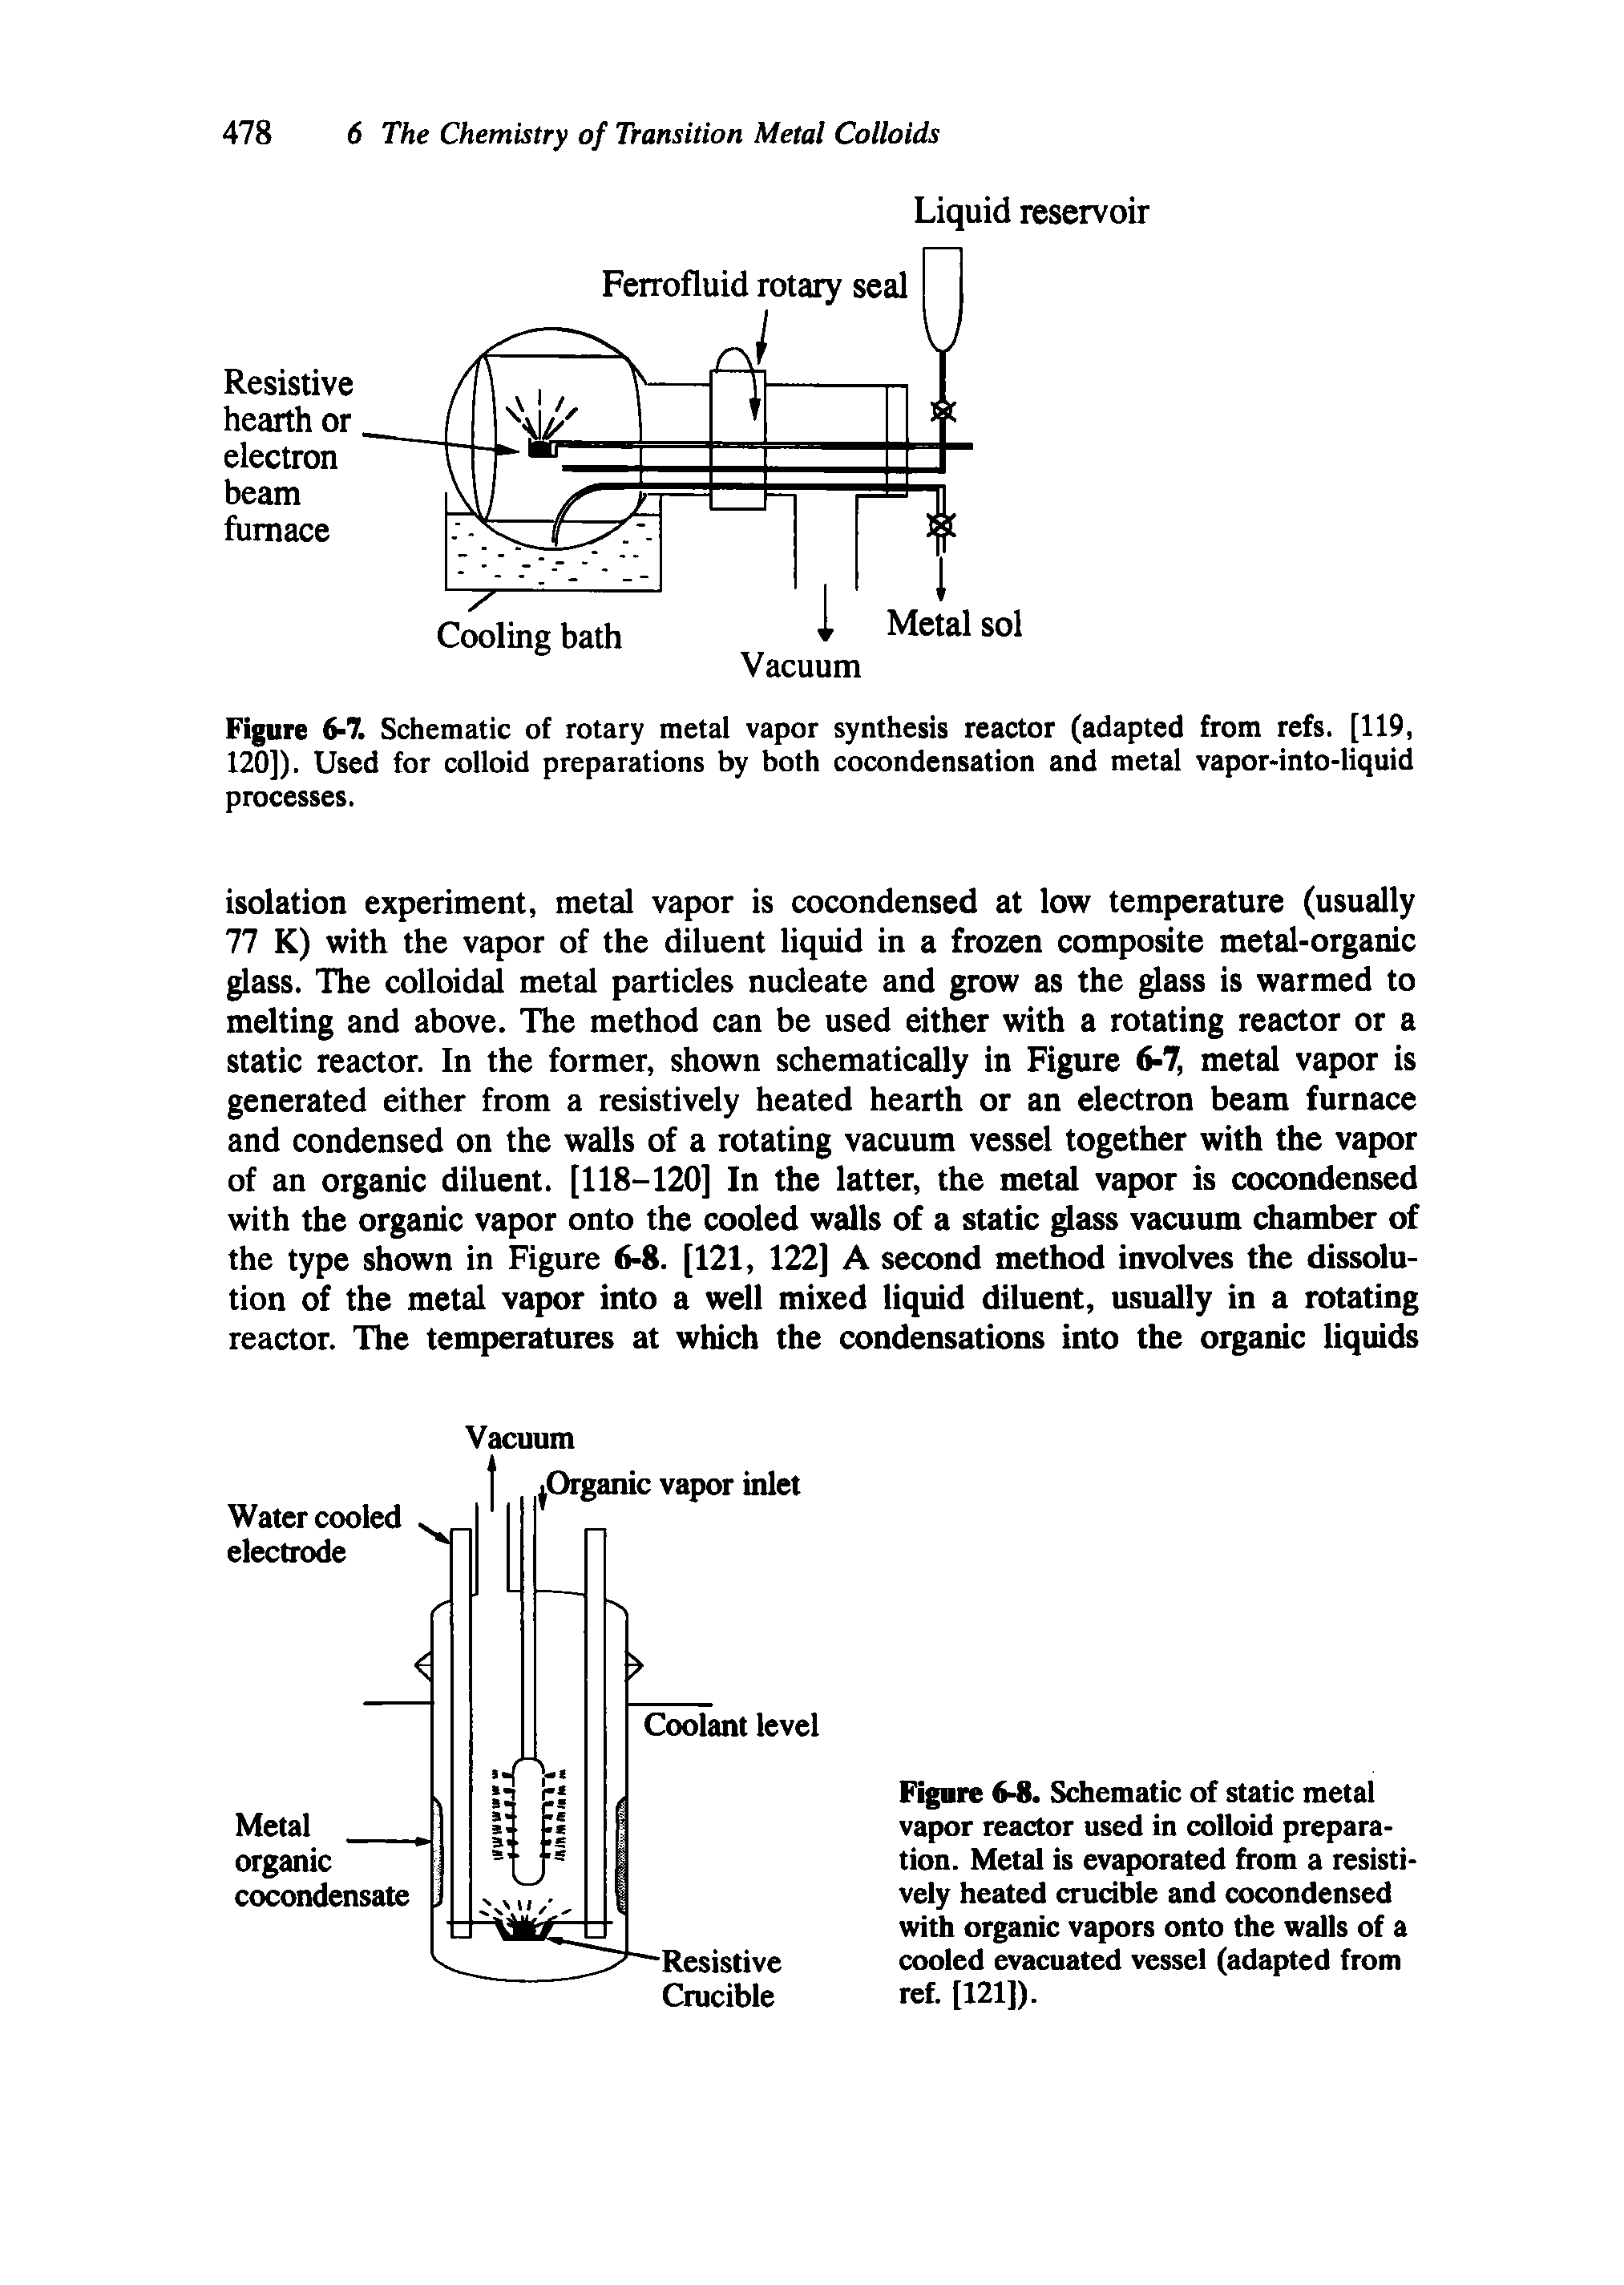 Figure 6-7. Schematic of rotary metal vapor synthesis reactor (adapted from refs. [119, 120]). Used for colloid preparations by both cocondensation and metal vapor-into-liquid processes.